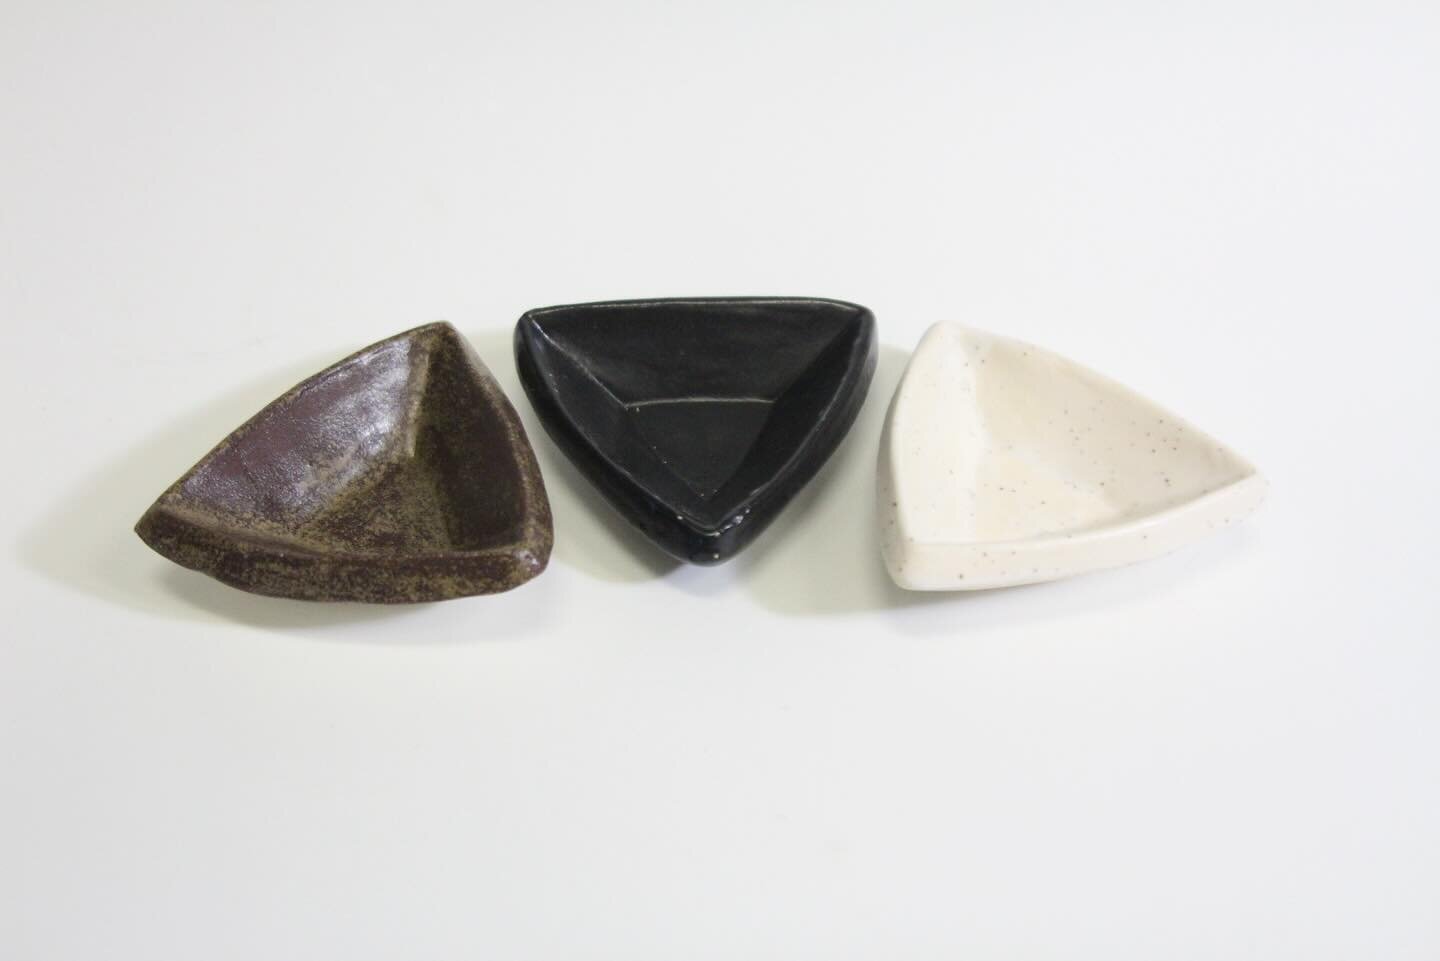 🌻 If neutrals are more you thing, I&rsquo;ve got your back! The rest of the glazes I have available are satin black, speckle brown, and speckle white. The Tiny Triangles are small, but are super versatile. They also stack together very nicely. If yo